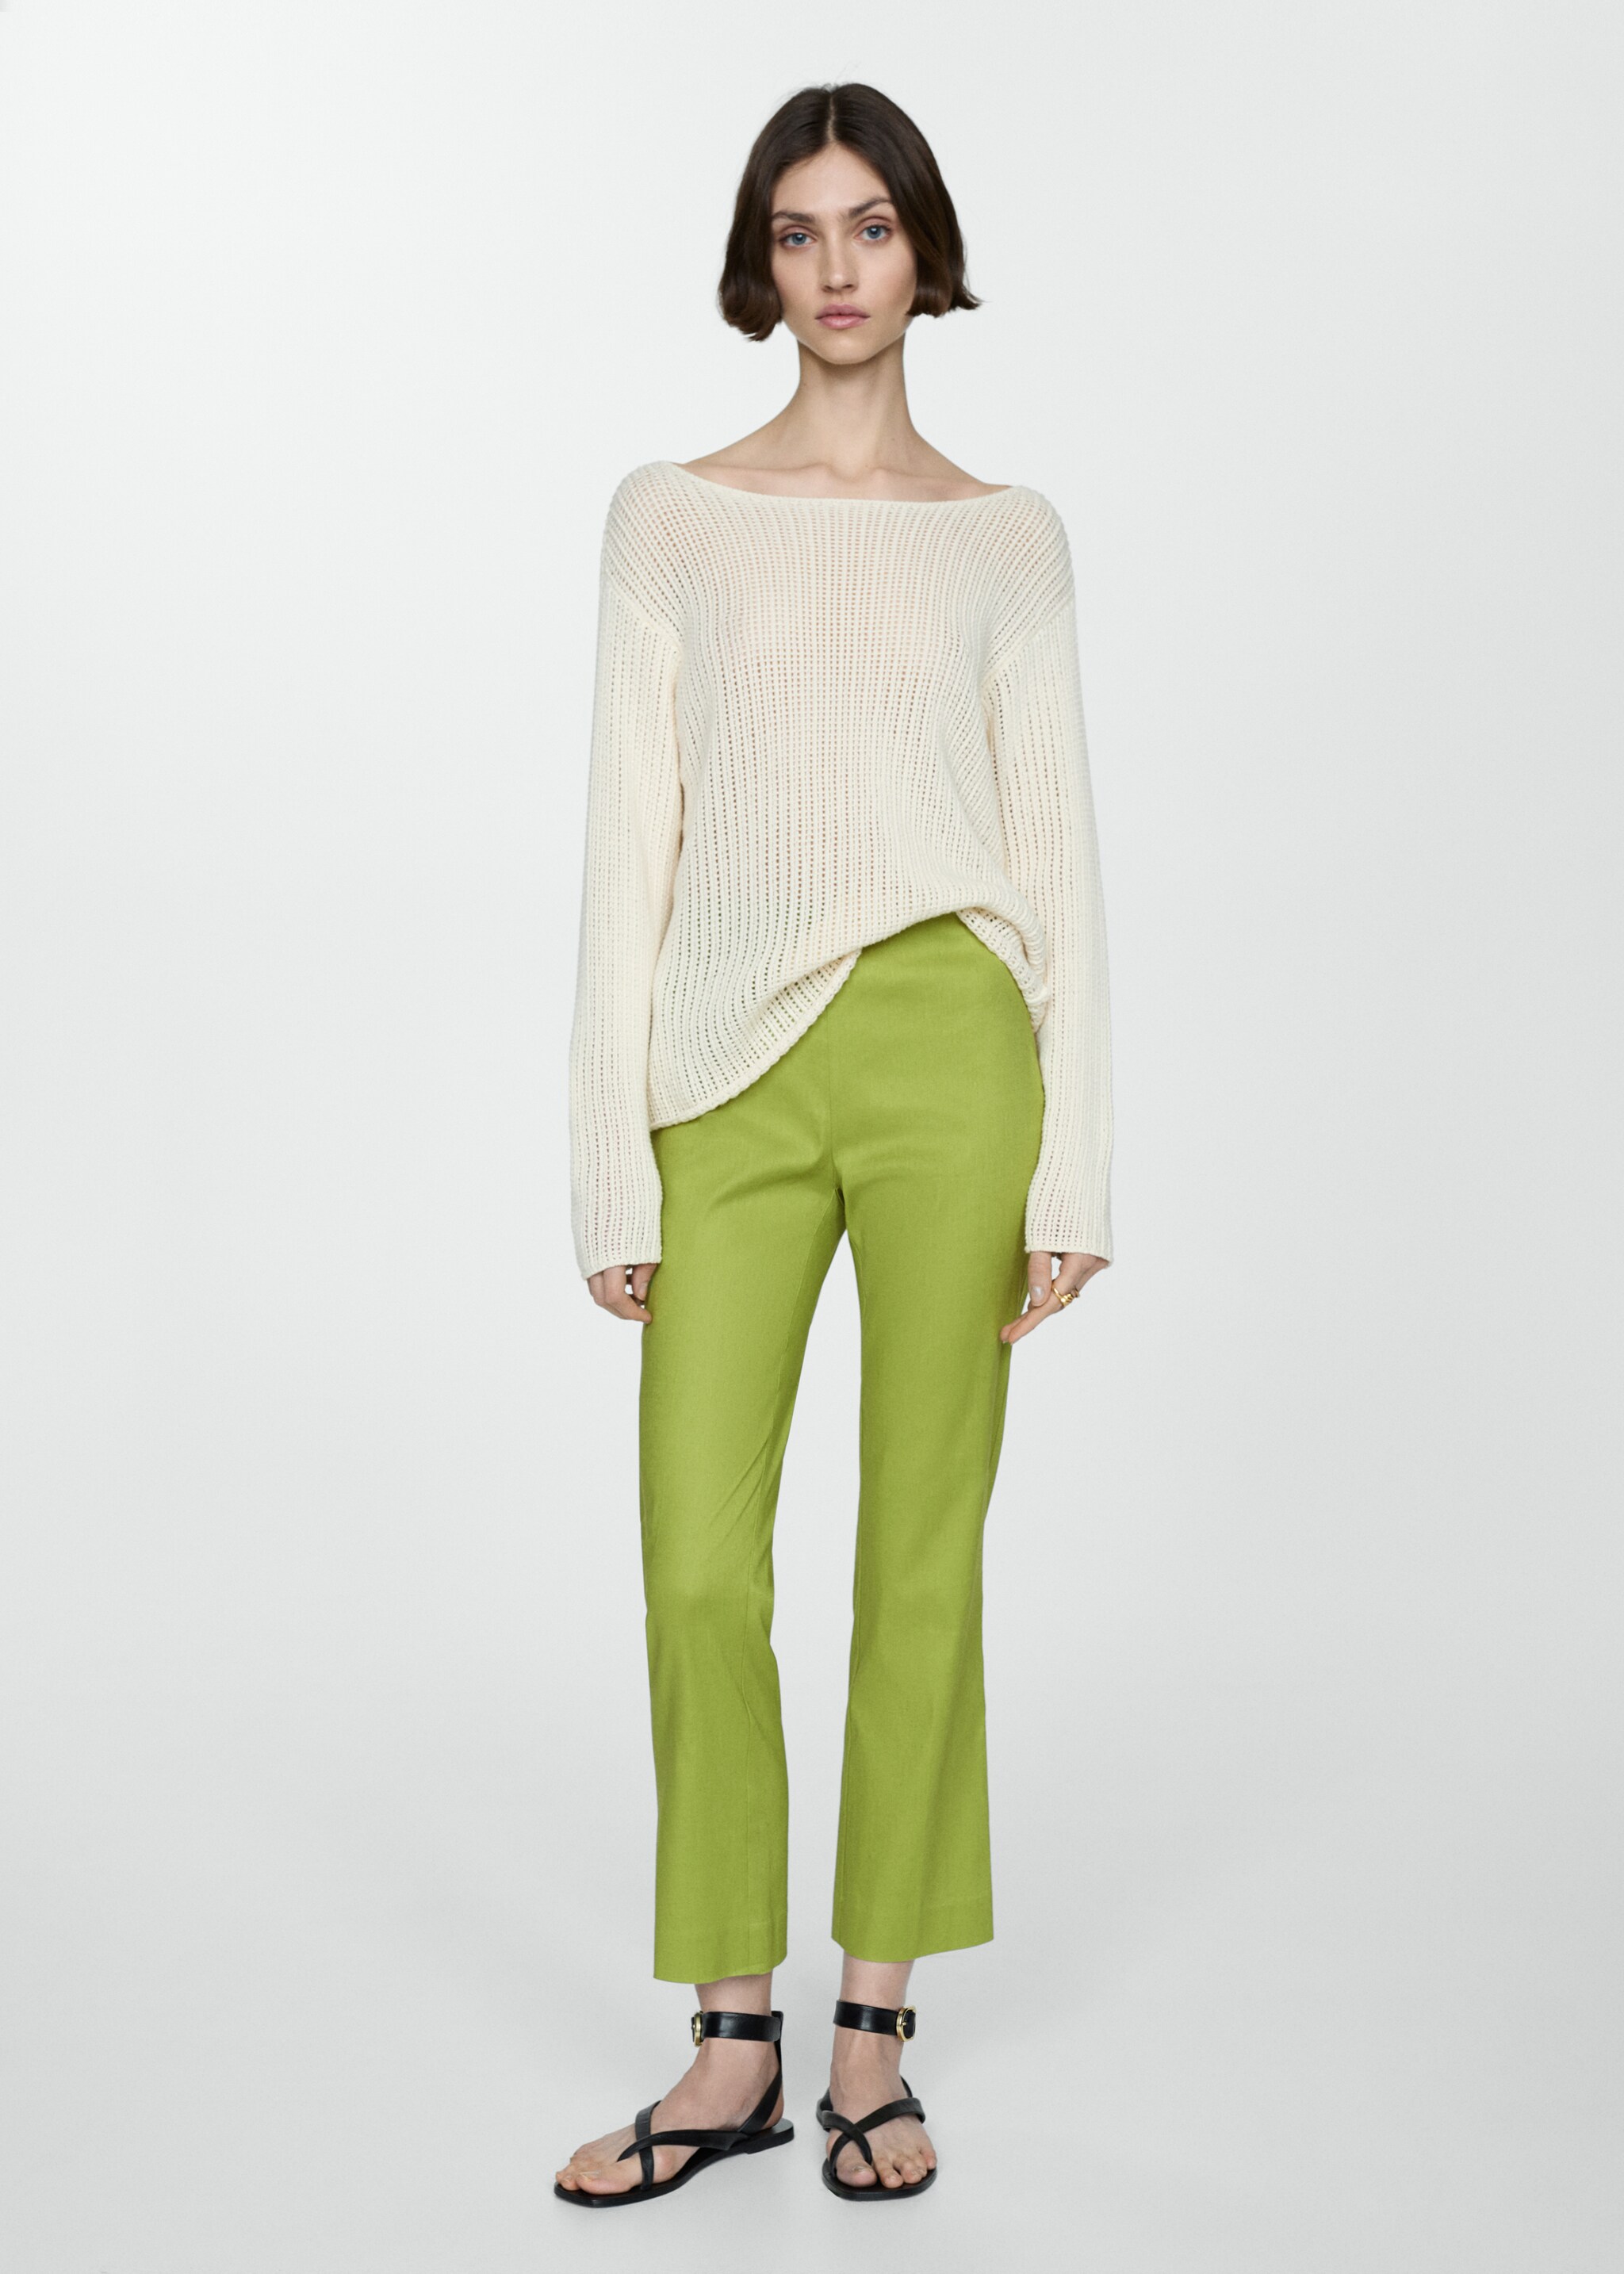 Linen flared trousers - General plane